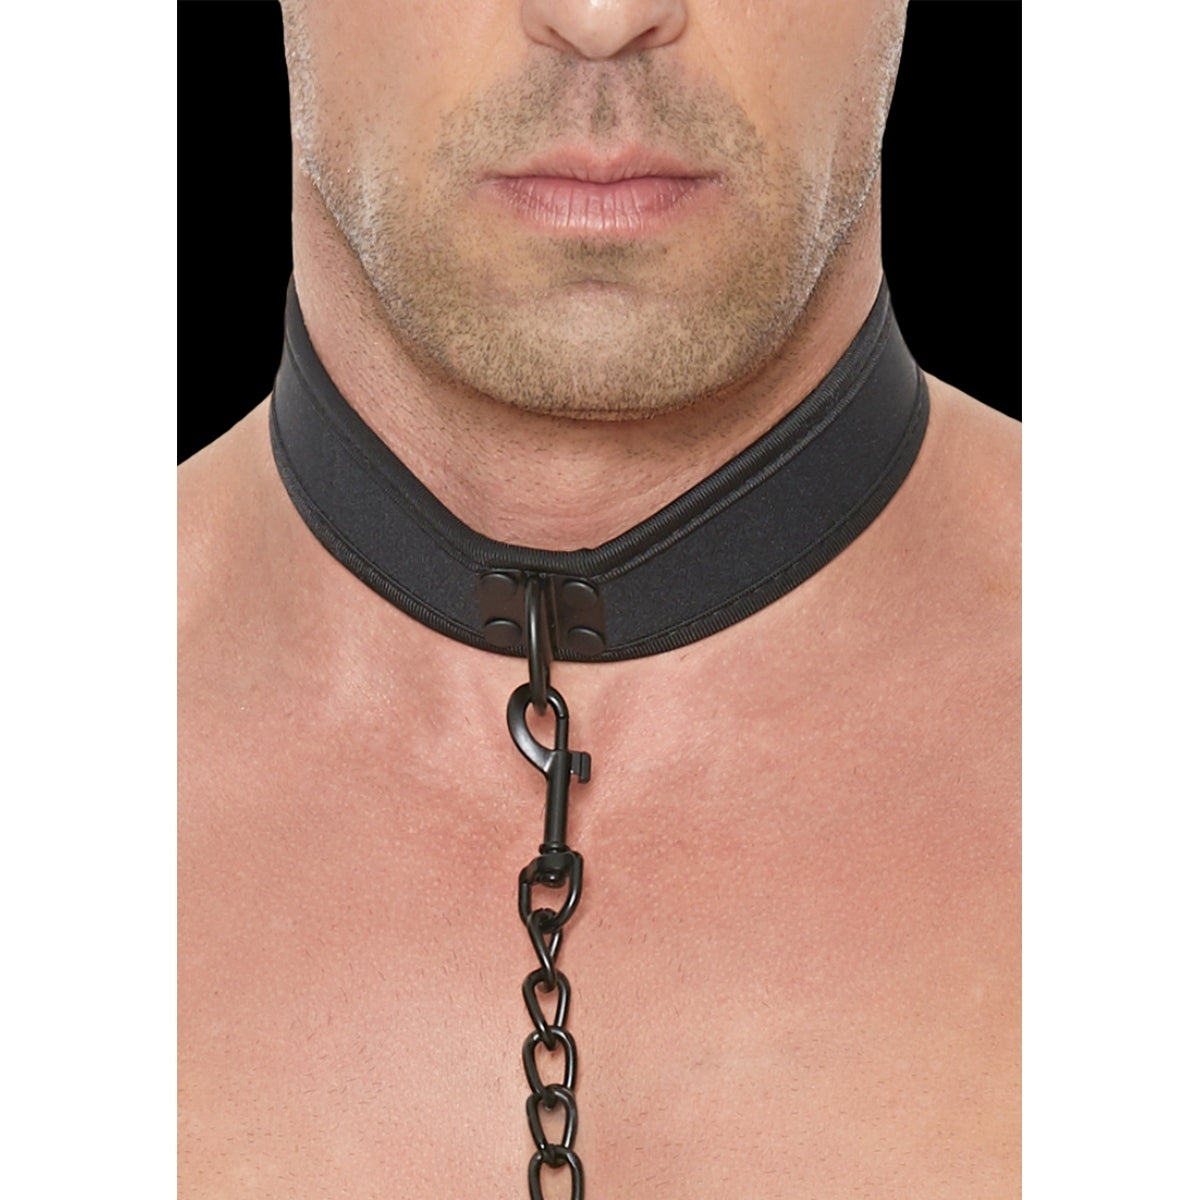 Ouch Puppy Play Neoprene Collar With Leash Black